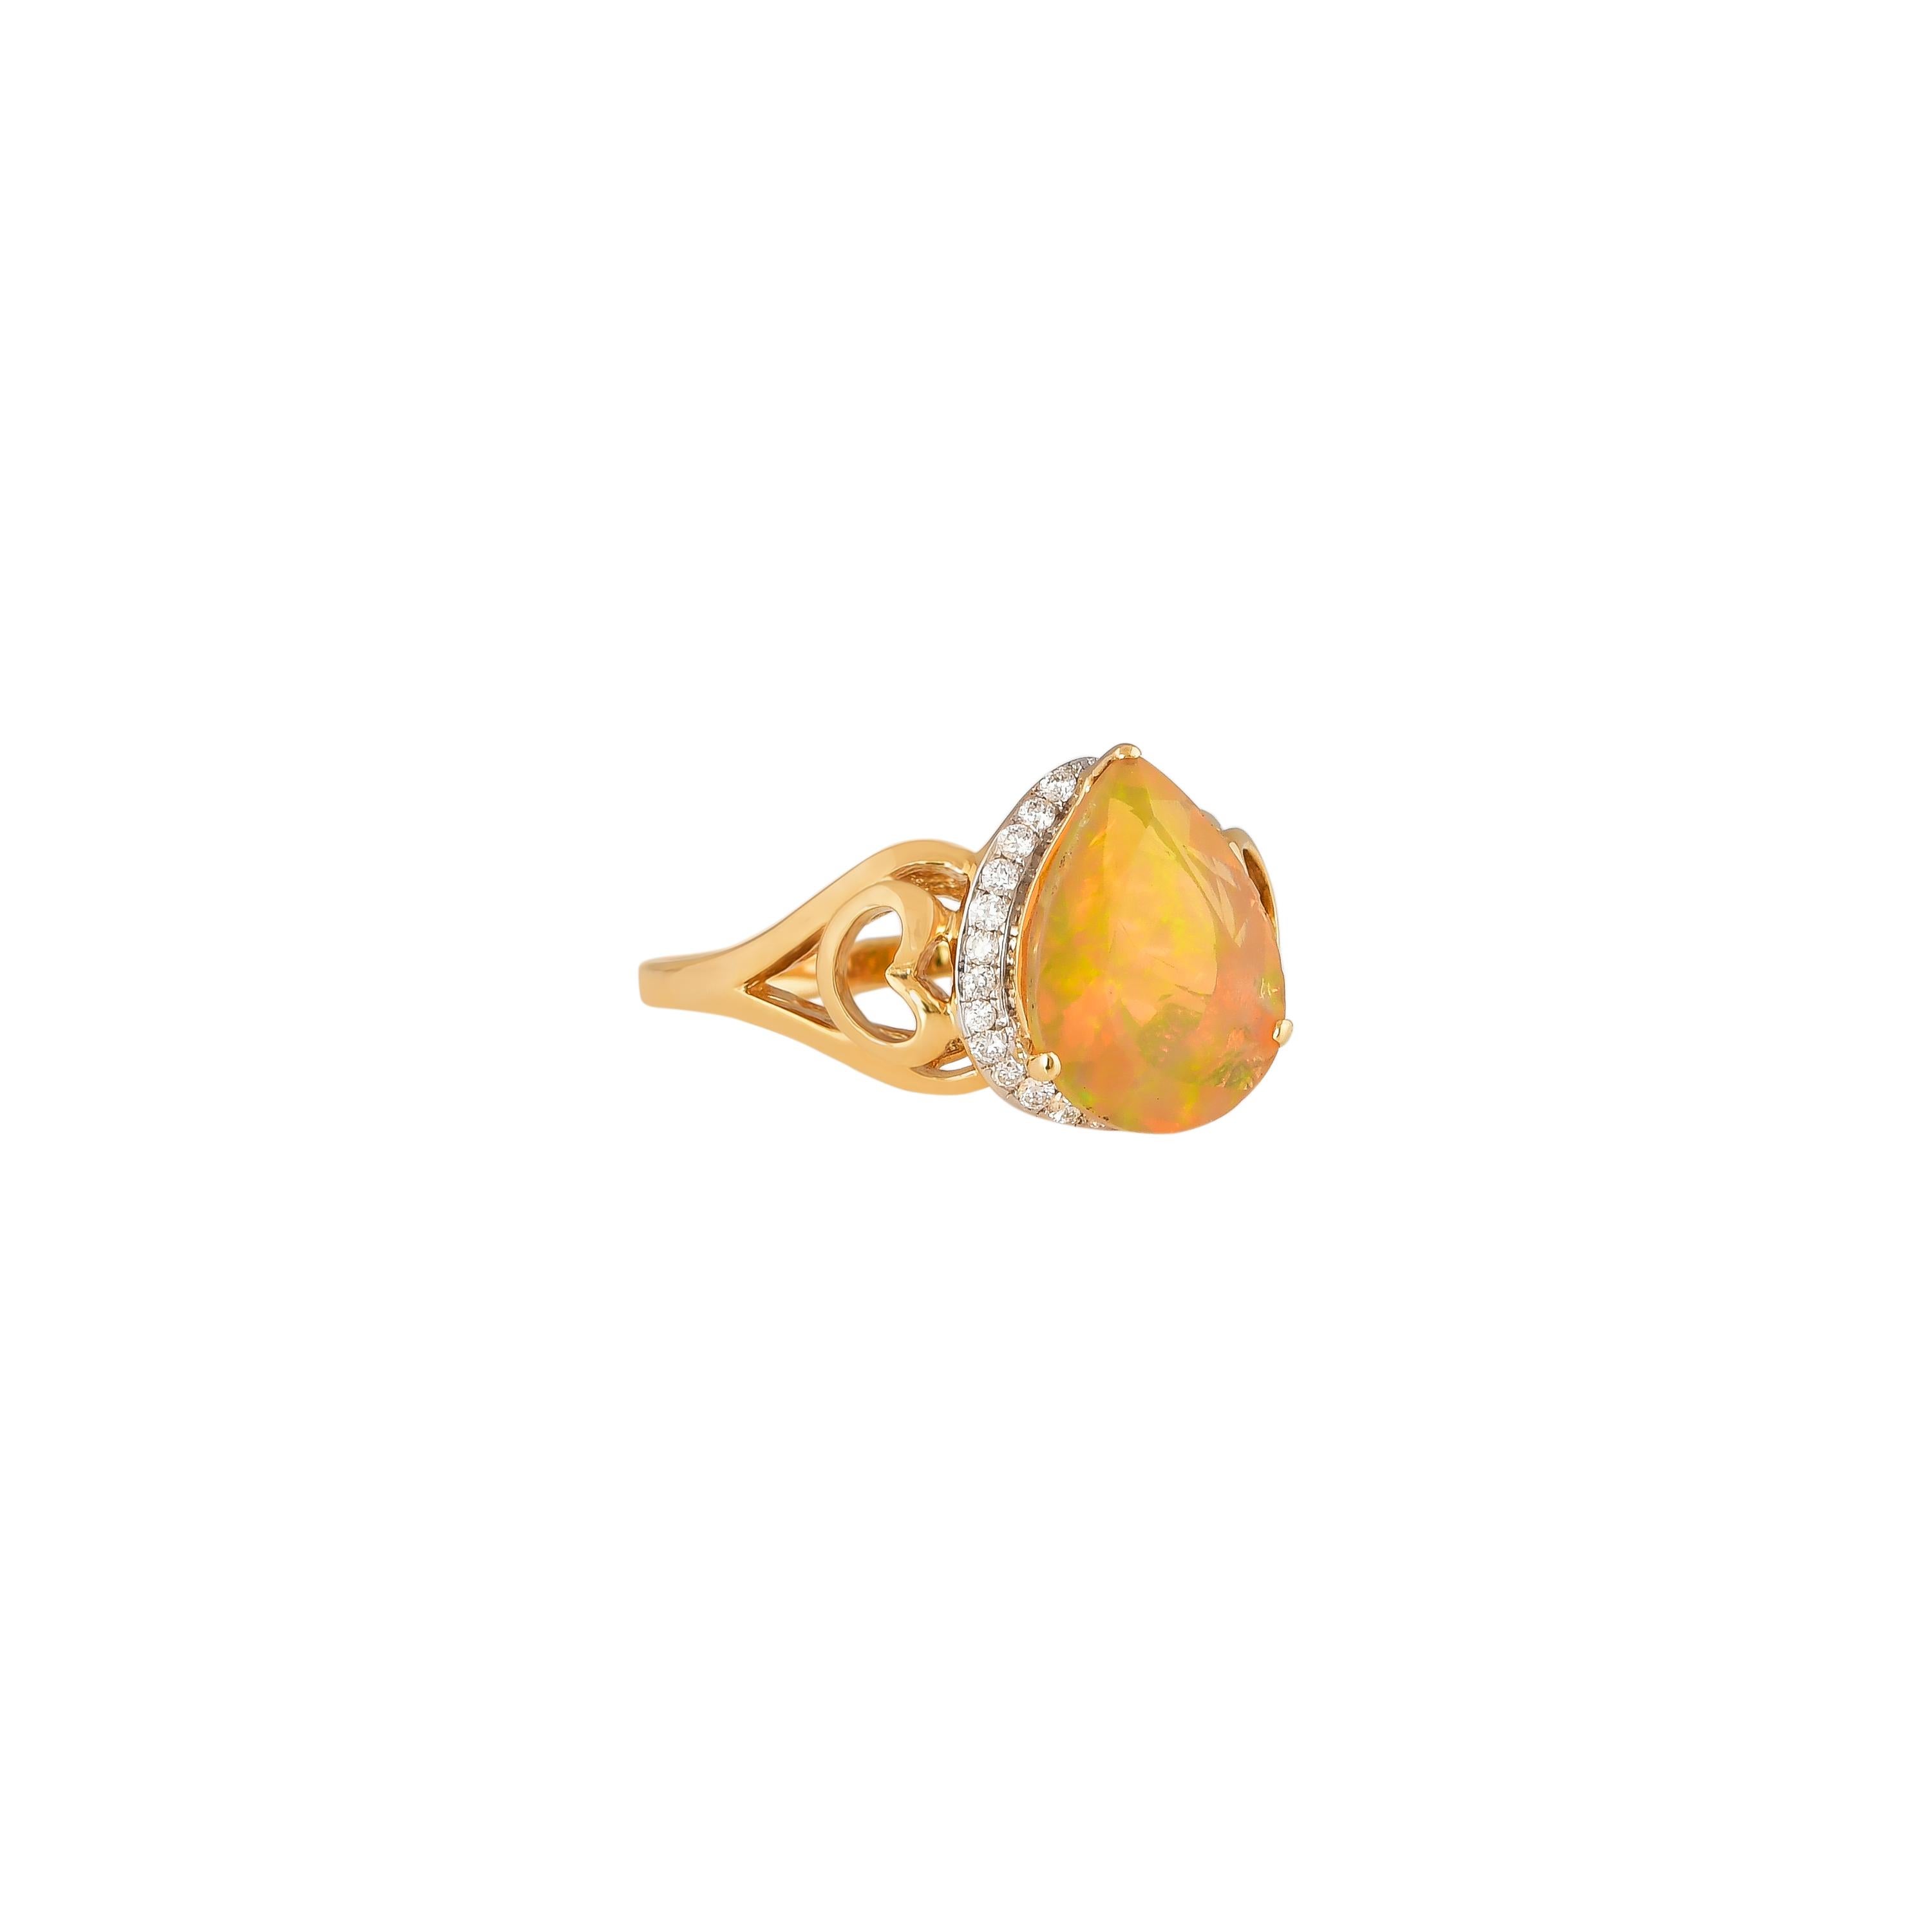 Sunita Nahata uses the most exquisite Ethiopian Opals accented with an dazzling diamonds to accentuate the fire and sparkle within these colorful opals. These gorgeous gemstones are set in yellow gold to strike a true royal feel to these rings.